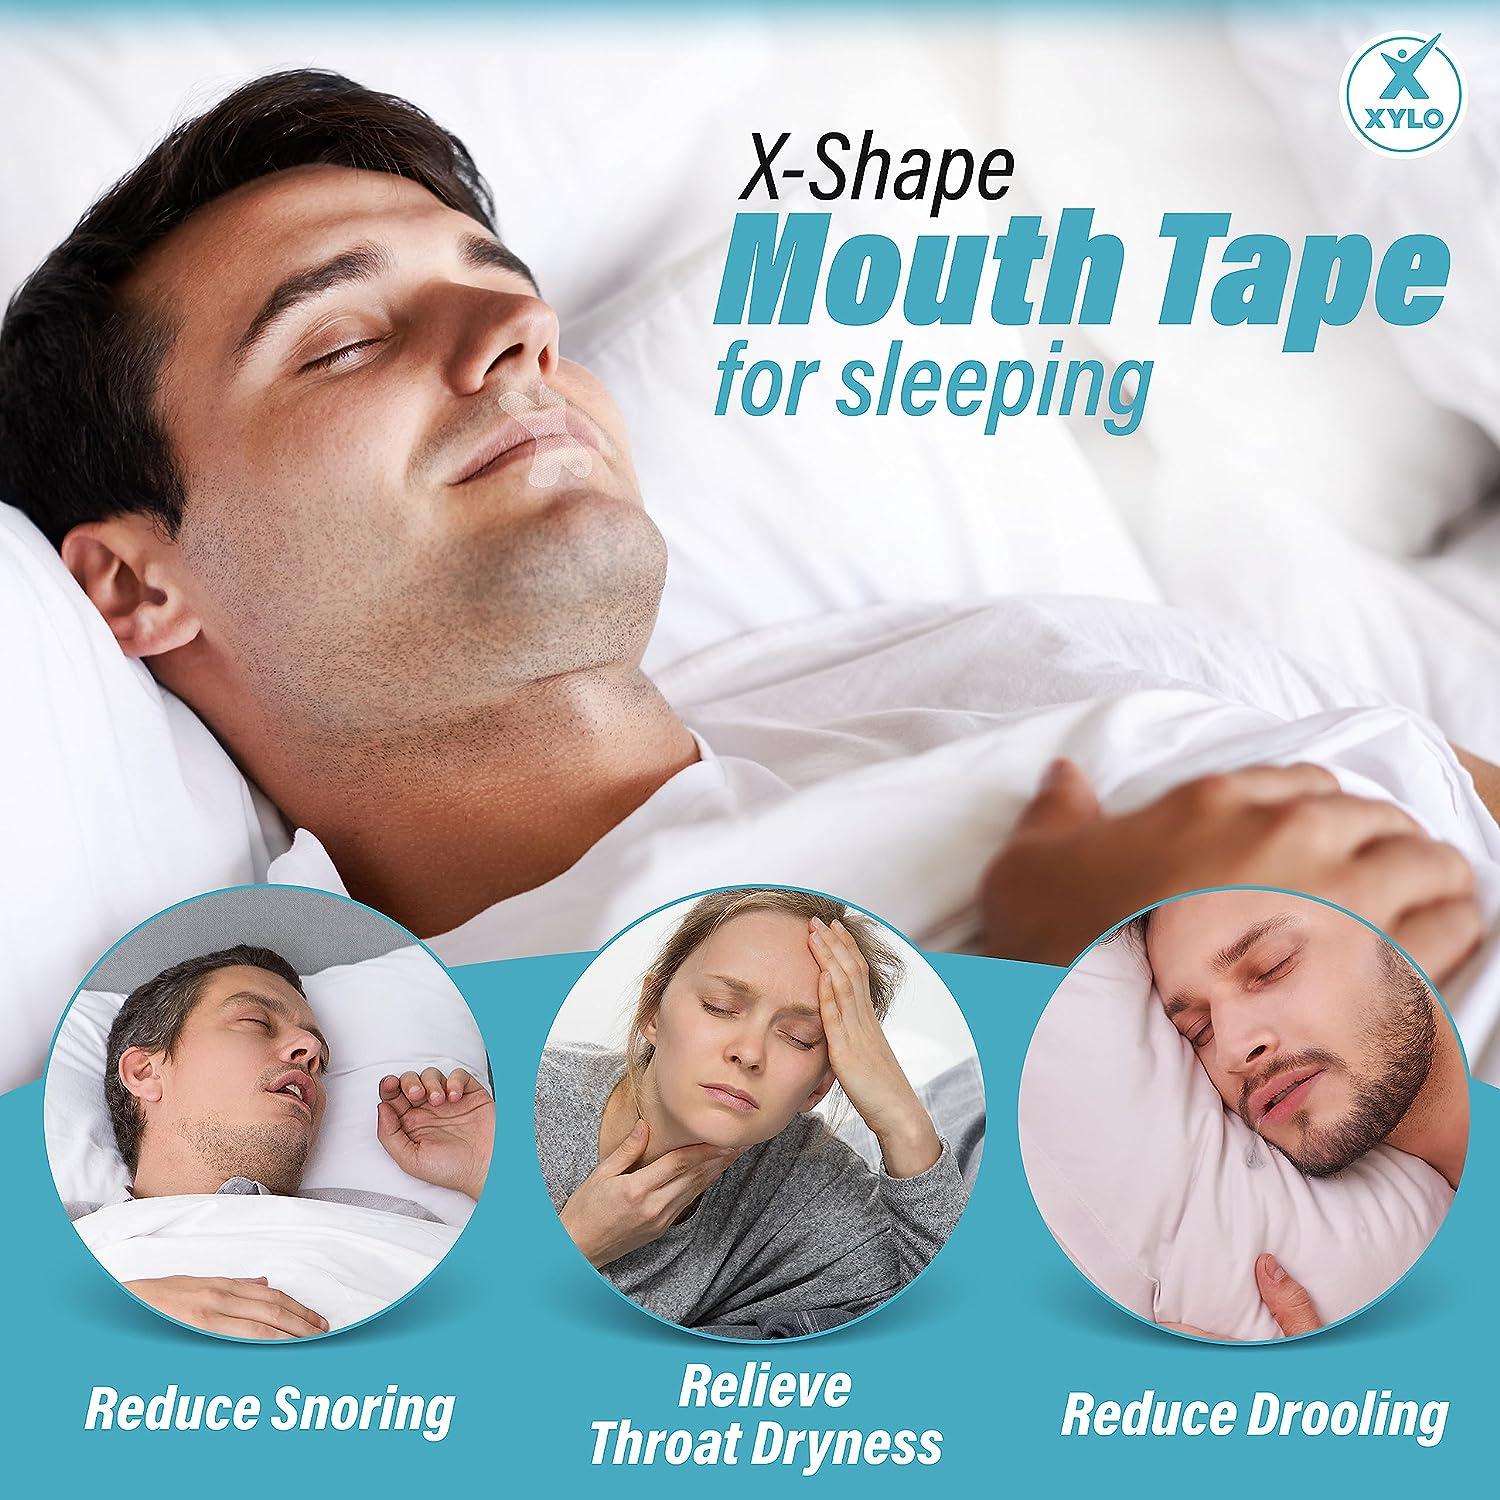 MUZOOY Mouth Tape for Sleeping, Pack of 120 H-Shape Mouth Plasters Sleep  Tape Helps Against Snoring Develops Nasal Breathing Habits 